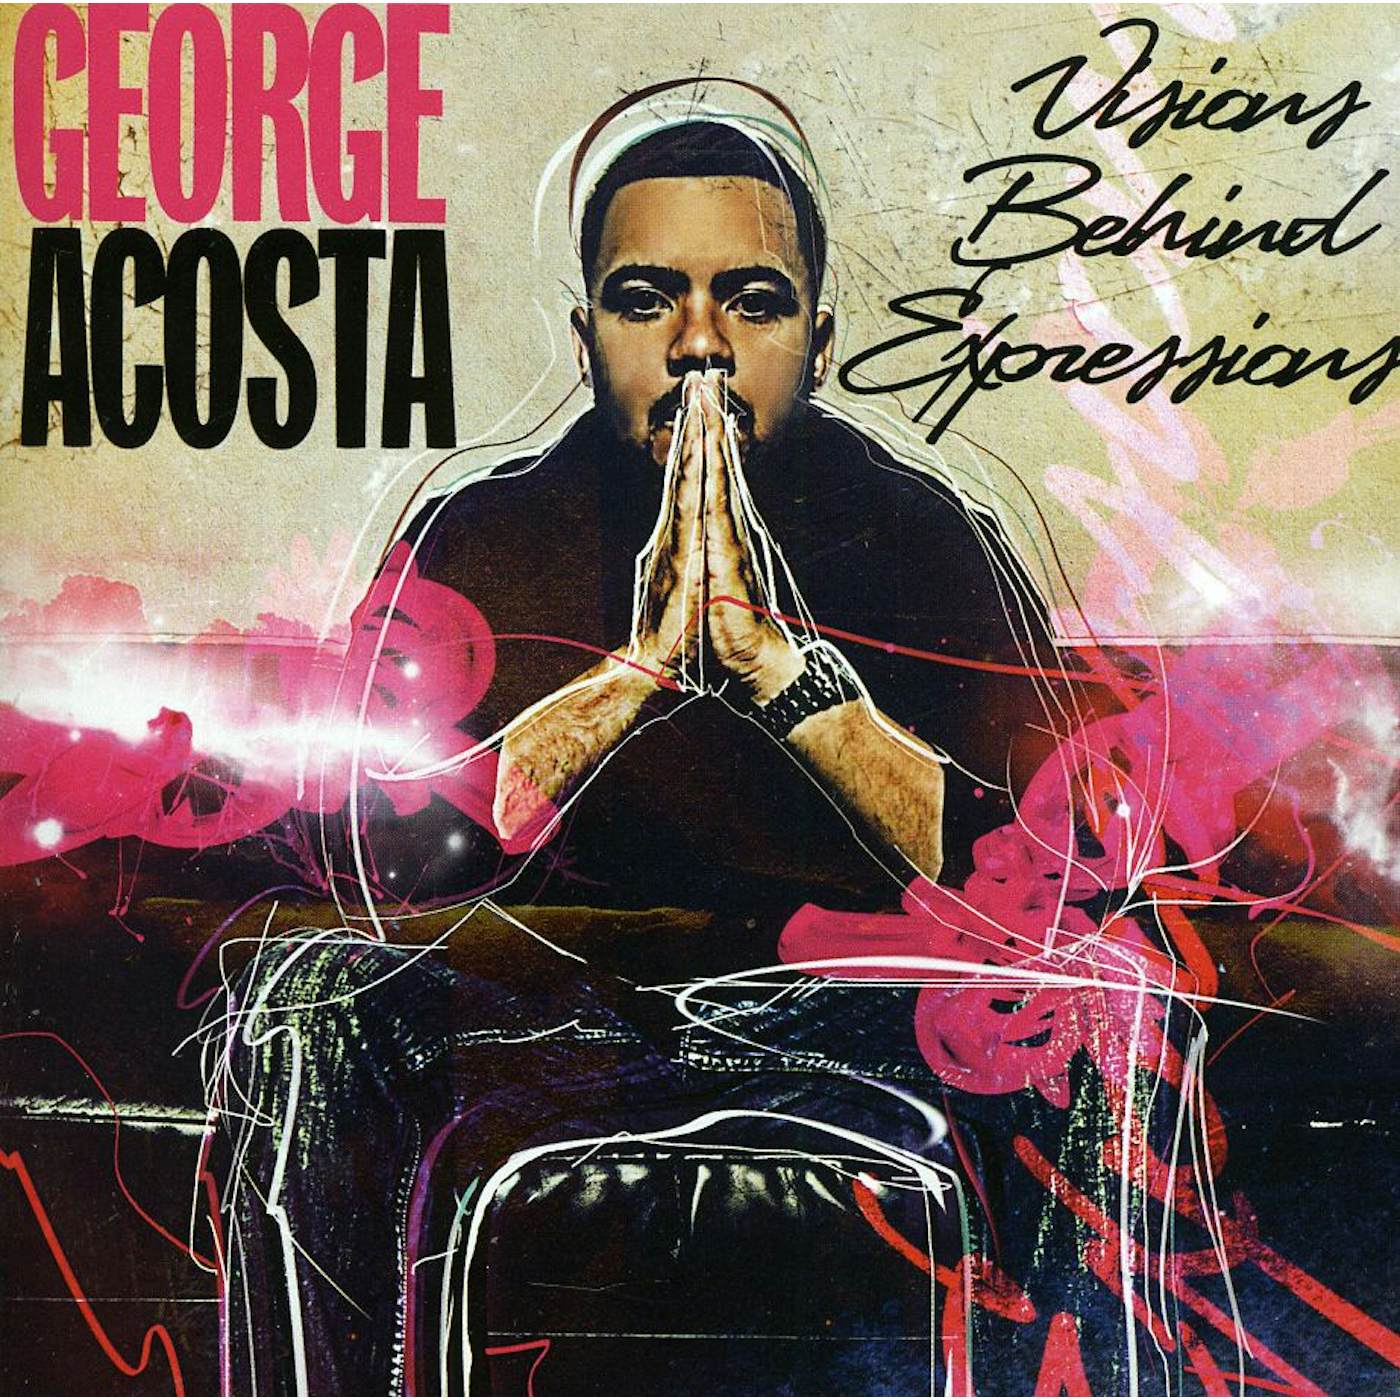 George Acosta VISIONS BEHIND EXPRESSIONS CD